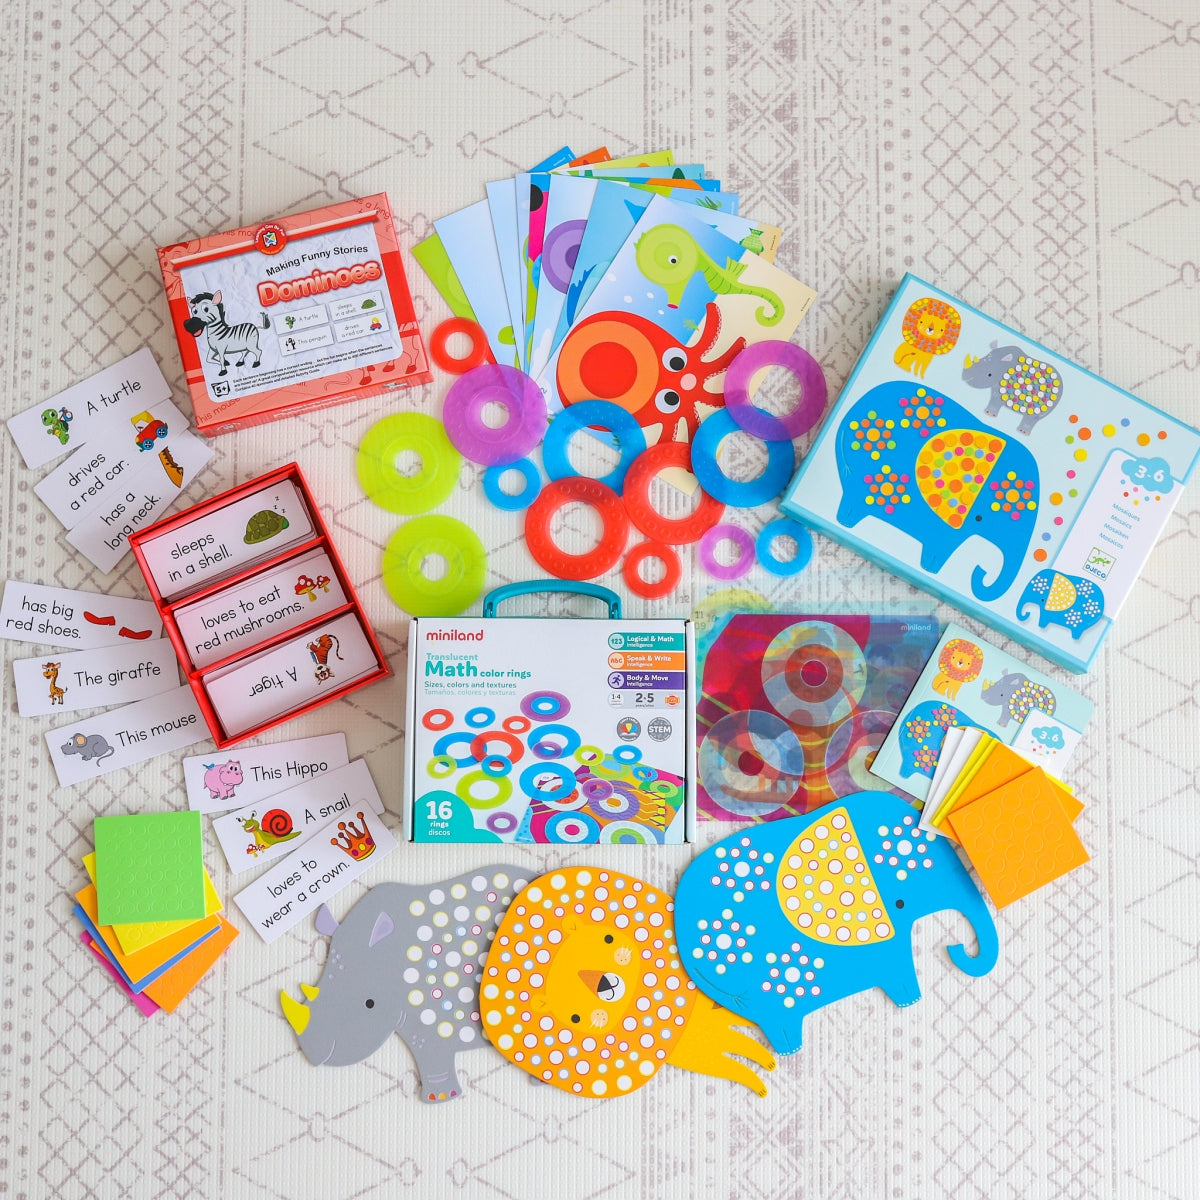 Toys spread out from April Play Subscription box from The Creative Toy Shop